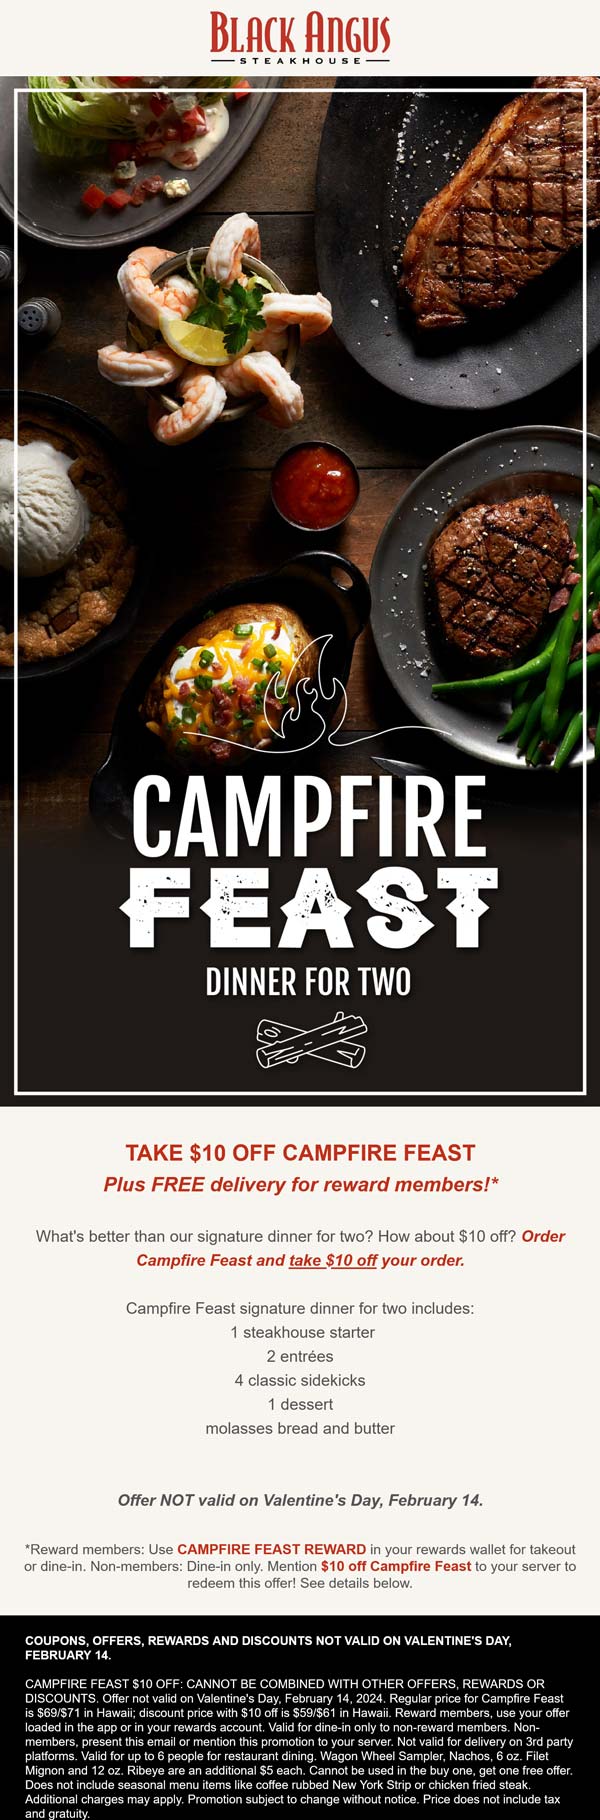 Black Angus restaurants Coupon  $10 off campfire feast for 2 at Black Angus steakhouse #blackangus 